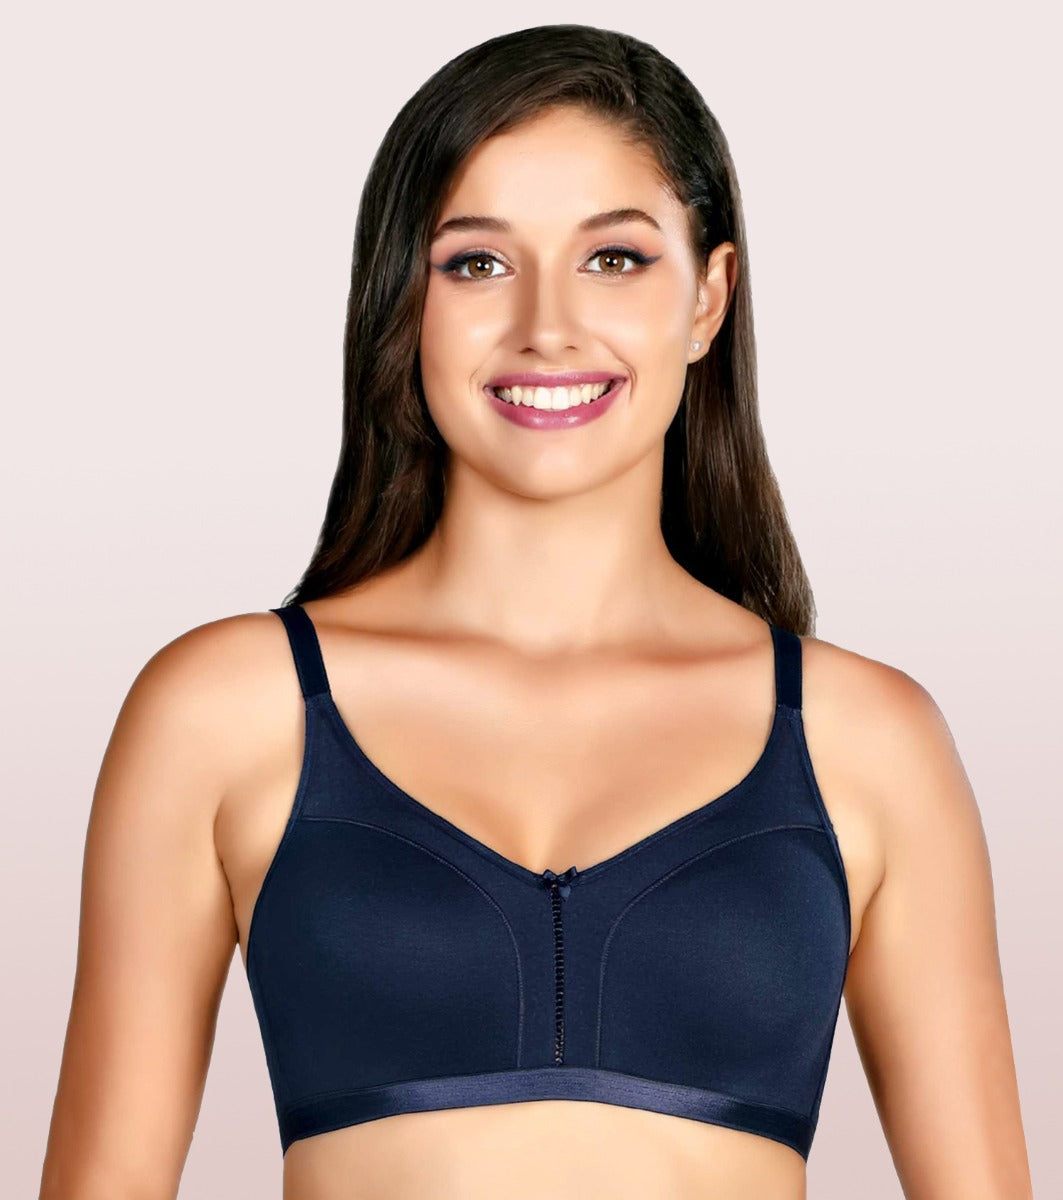 Enamor Bra Price Starting From Rs 200/Box. Find Verified Sellers